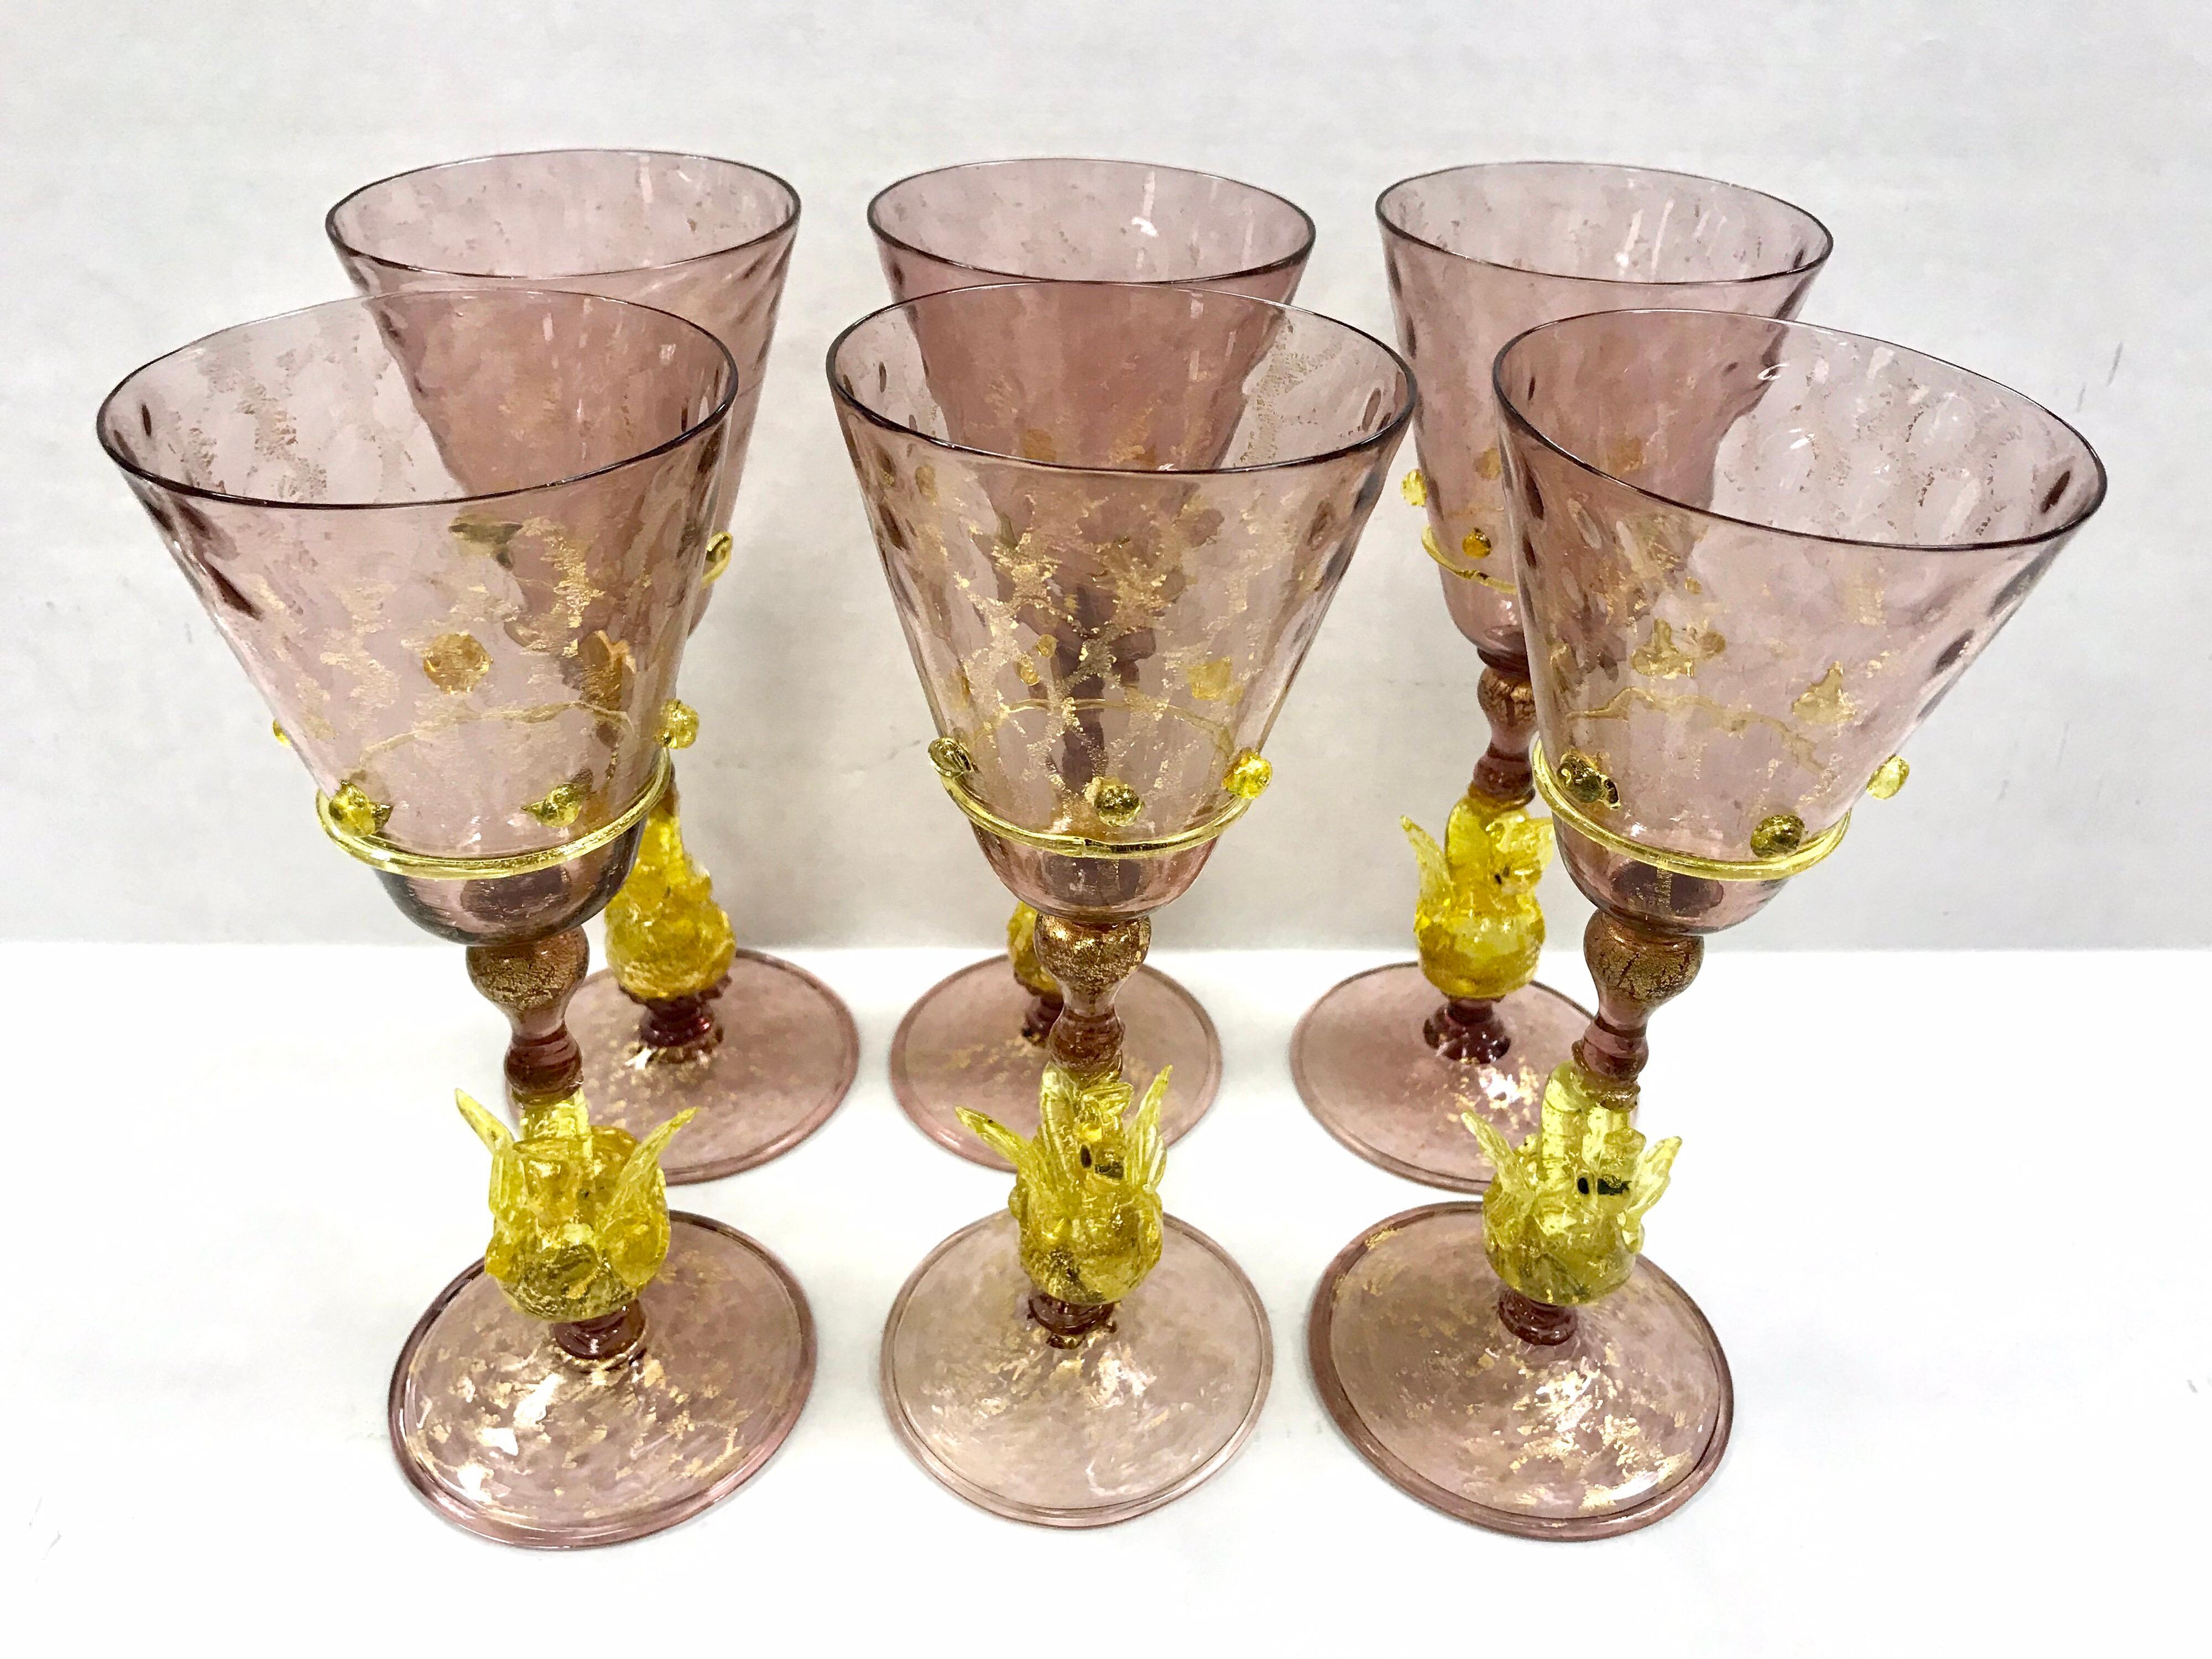 This is a rare set of six, hand blown Venetian stemware glasses made by Salviati, circa 1920s. The set appear to be wine glasses and are spectacular. They feature a figural golden yellow swan connector and applied applique. The color is a soft